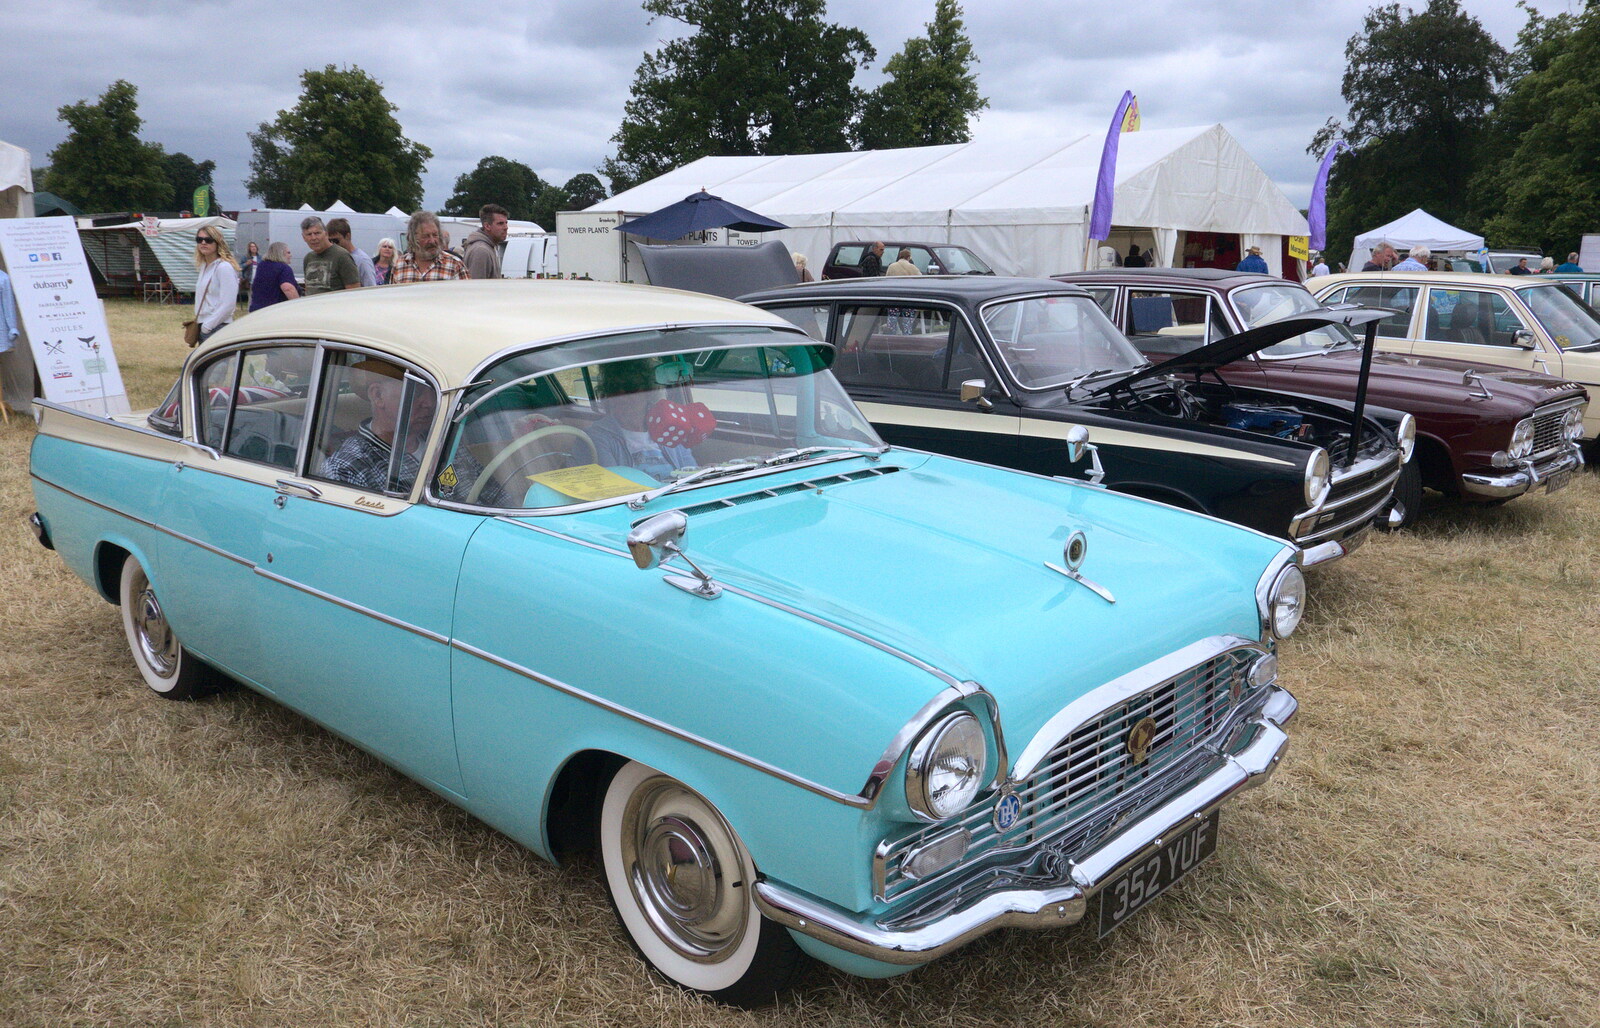 A classic 50s car from The Formerly-Known-As-The-Eye-Show, Palgrave, Suffolk - 17th June 2018